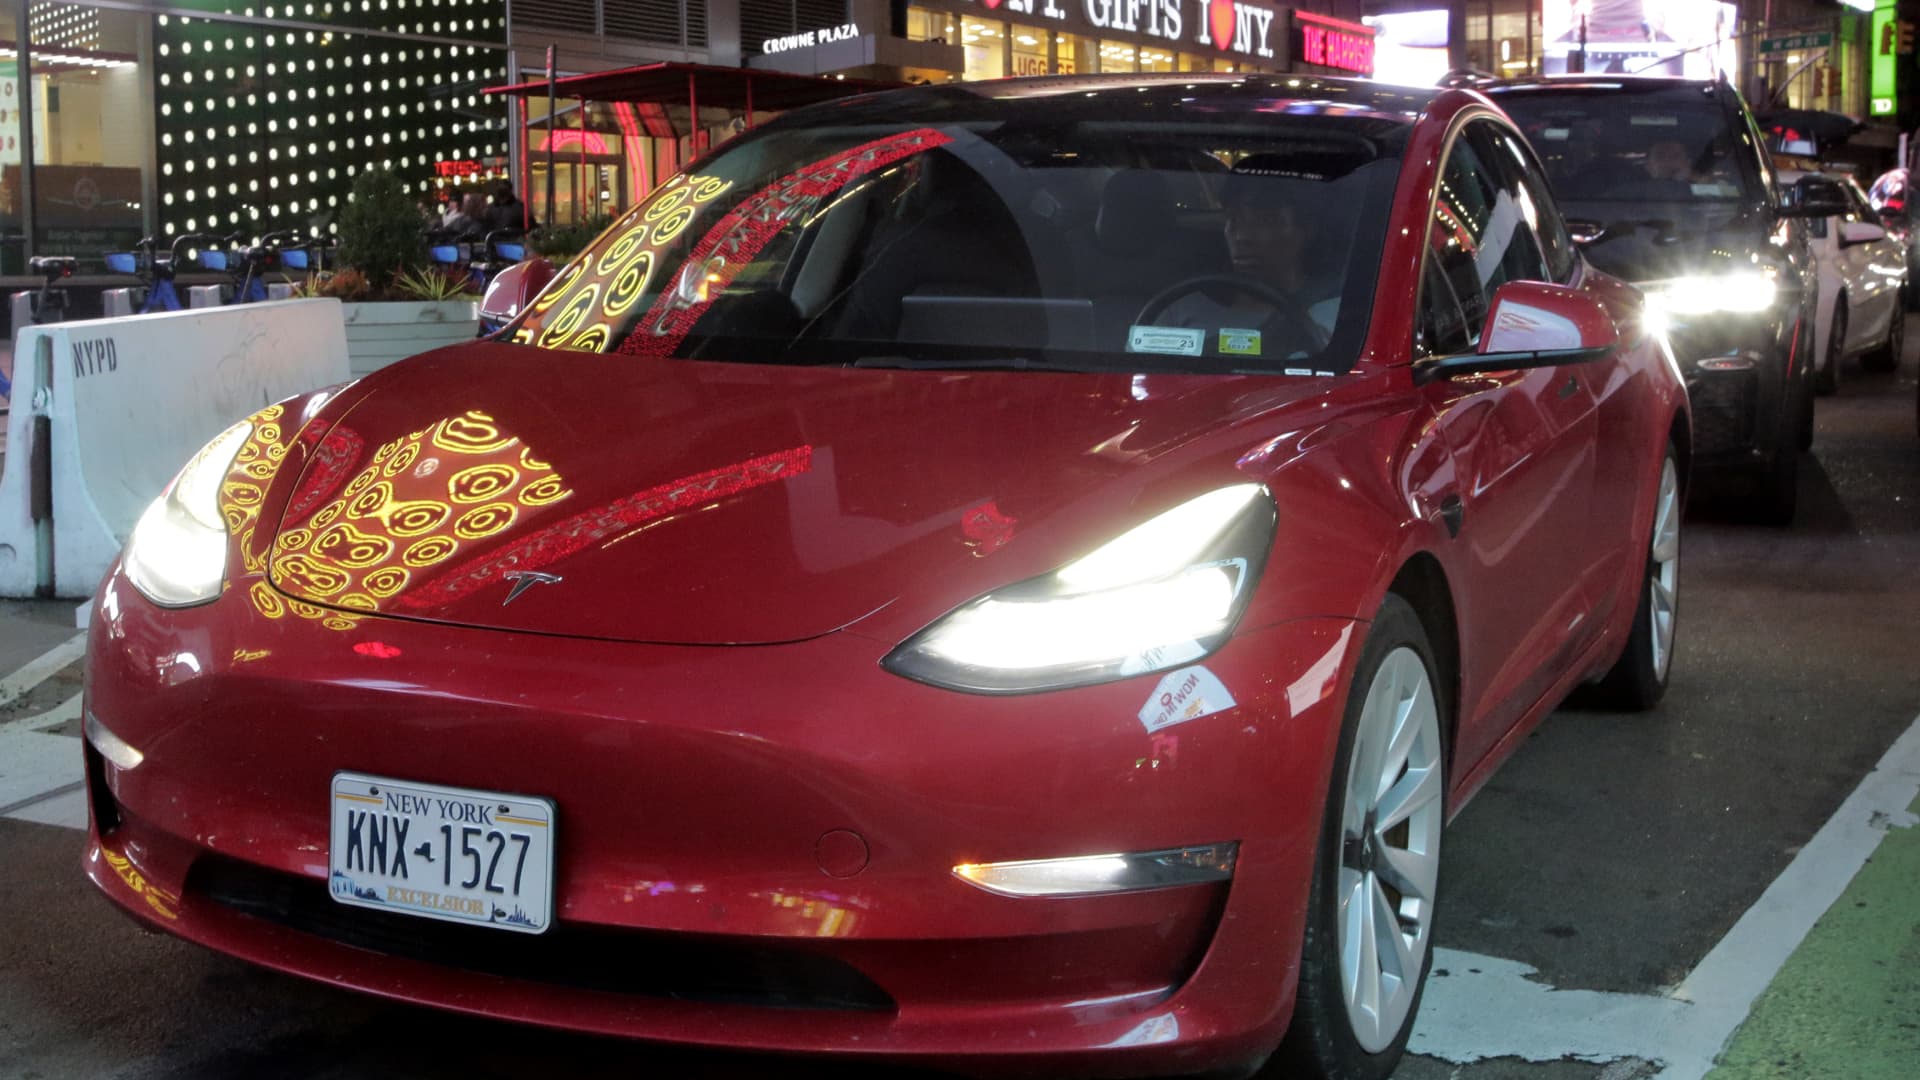 Tesla shares rose 30% last week. Here’s where Wall Street sees it going next